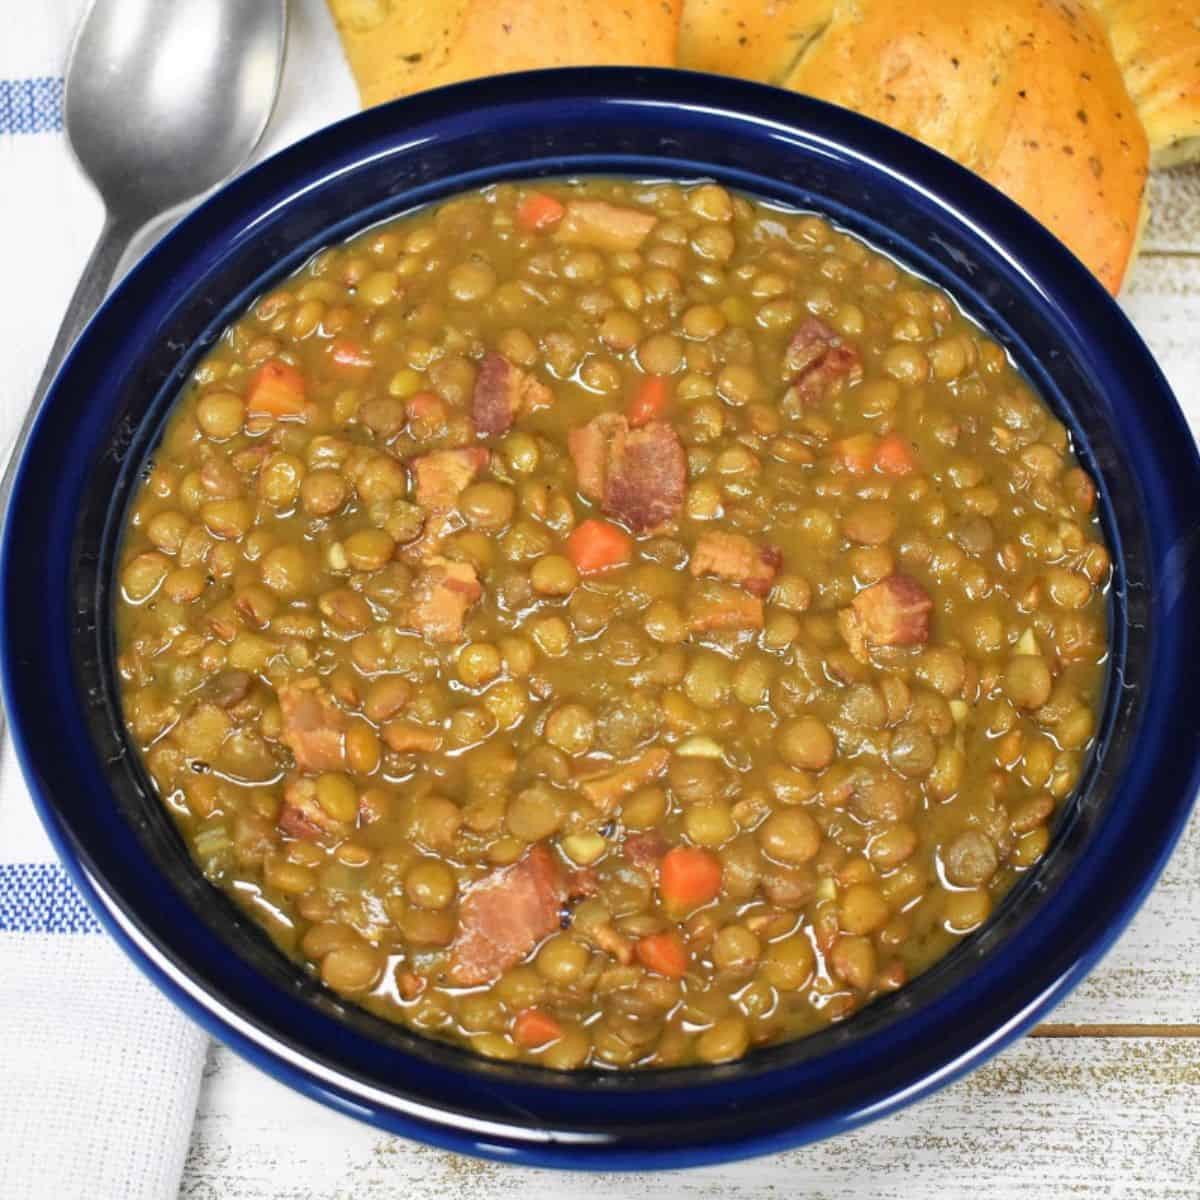 Bacon and lentil soup served in a blue bowl with a piece of bread in the background and a spoon to the left.